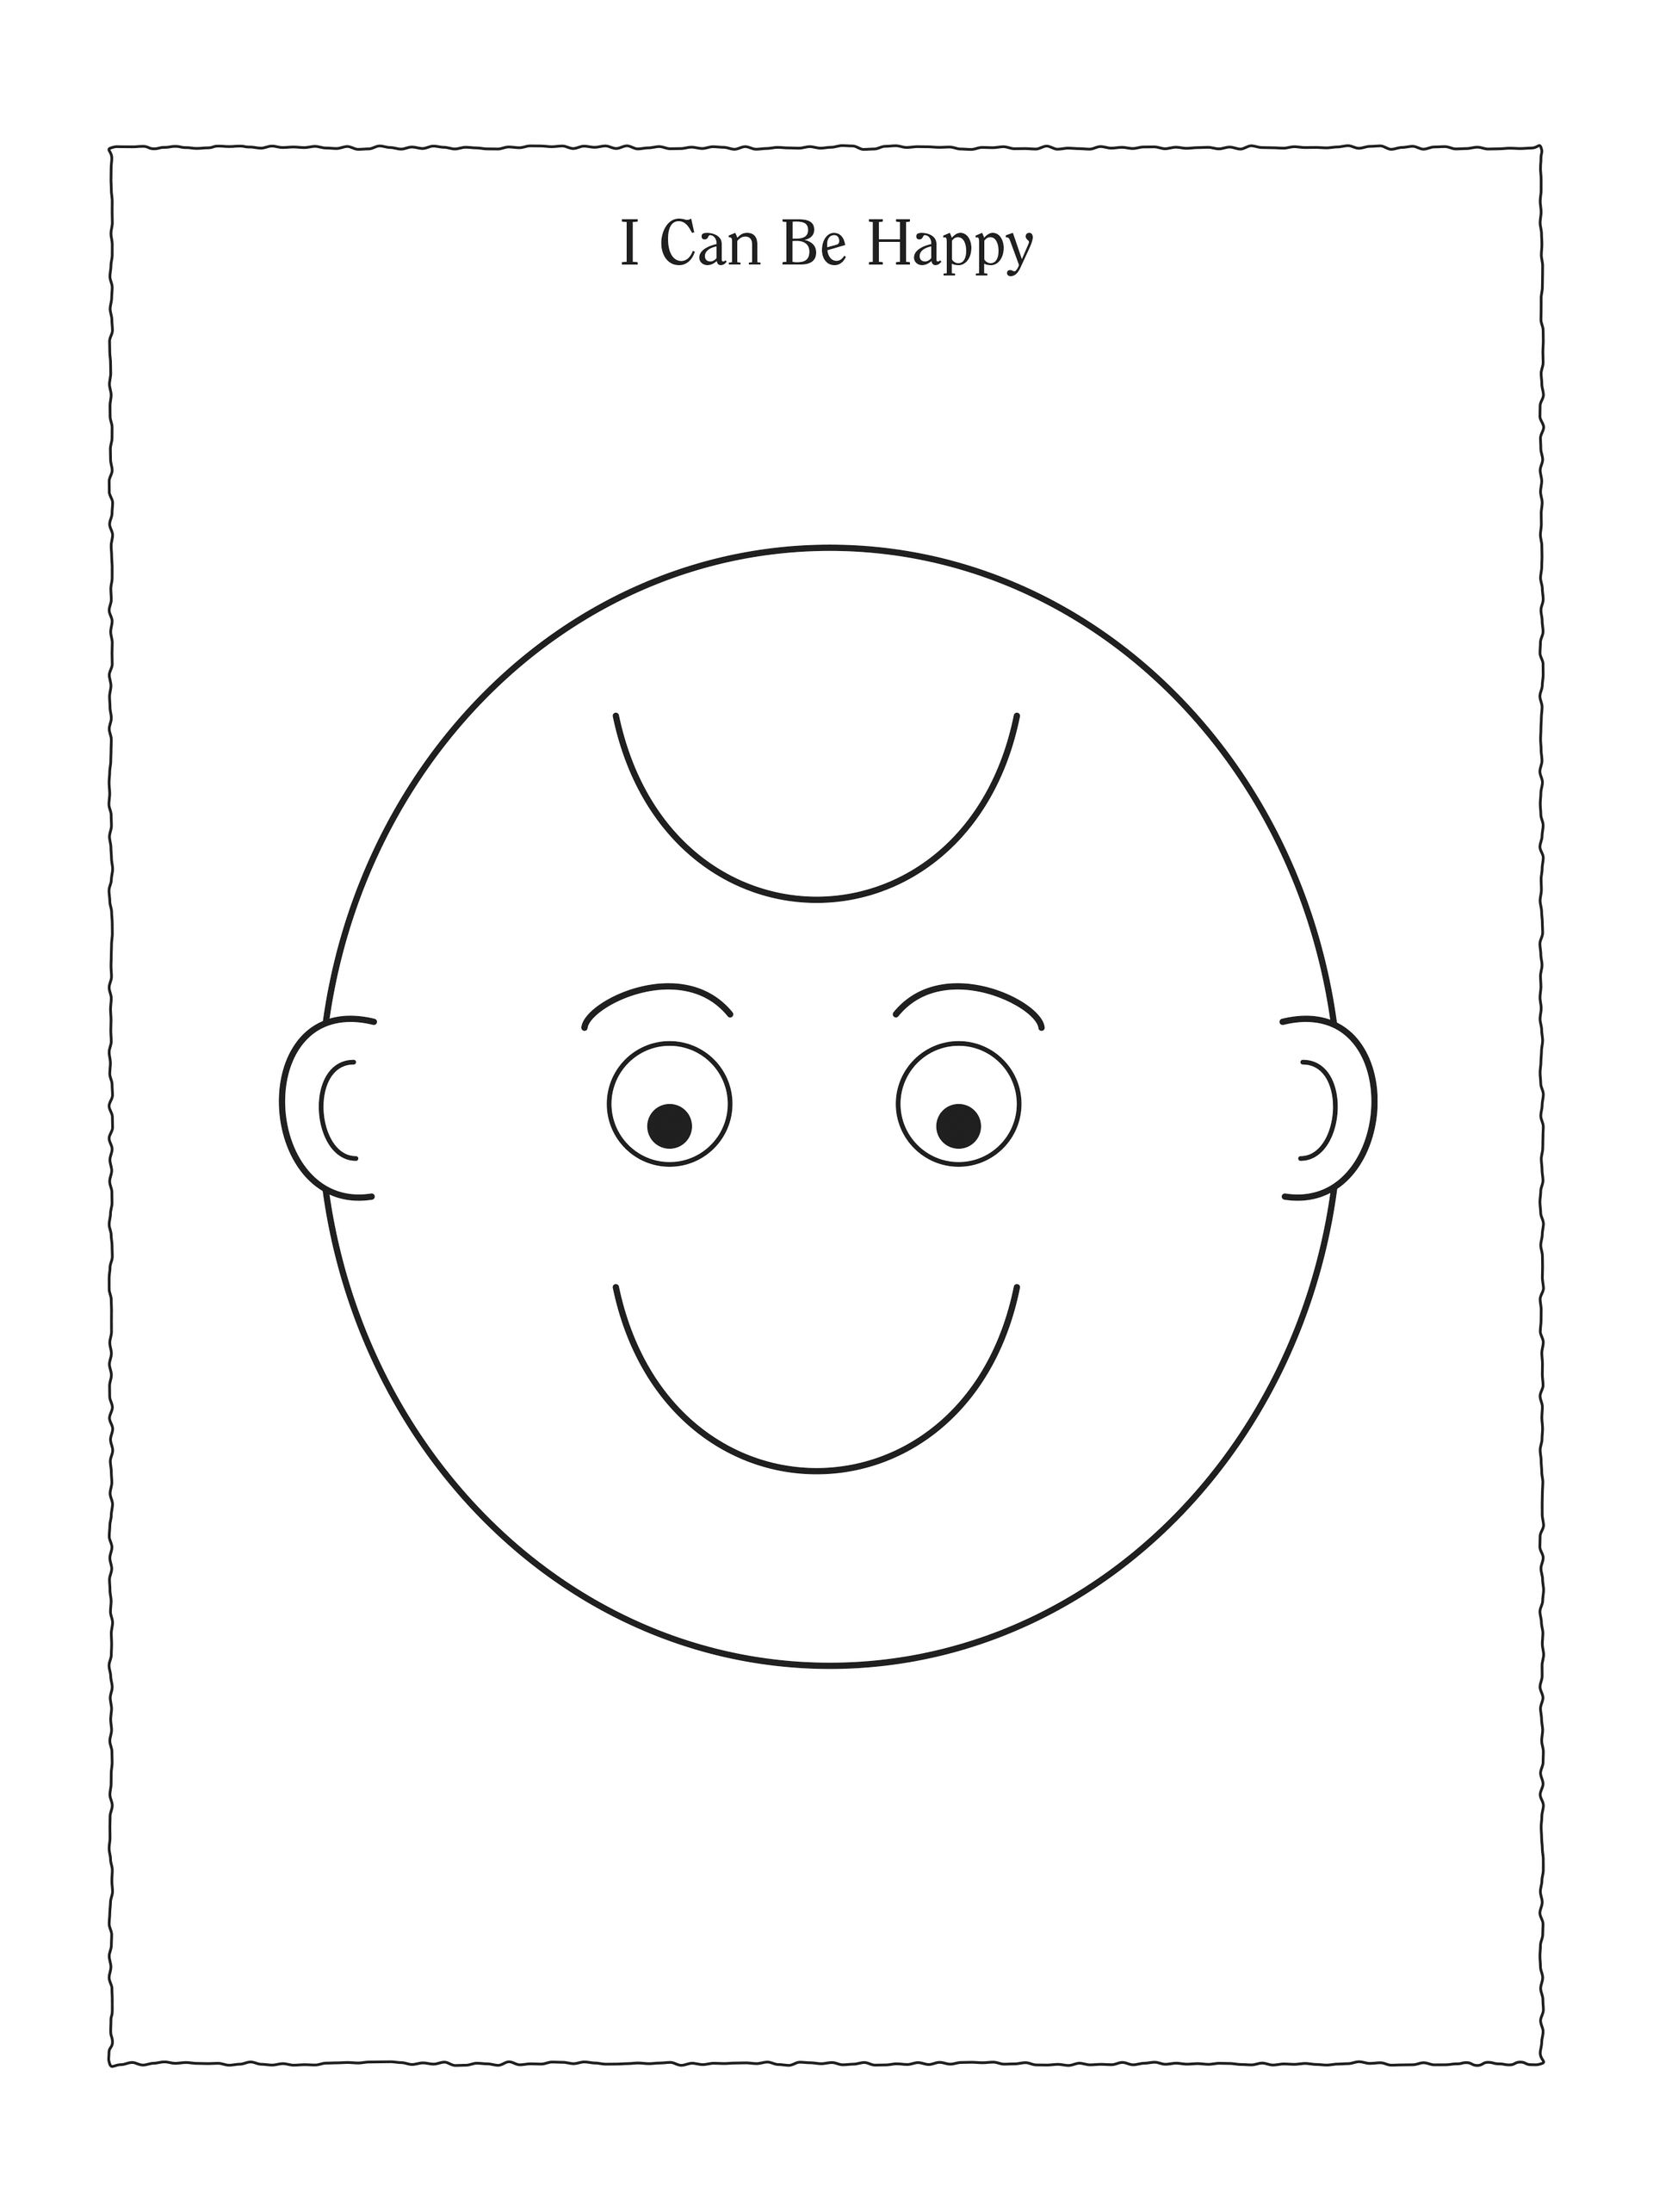 An illustration and activity from lesson 19, page 83 in the nursery manual Behold Your Little Ones (2008).